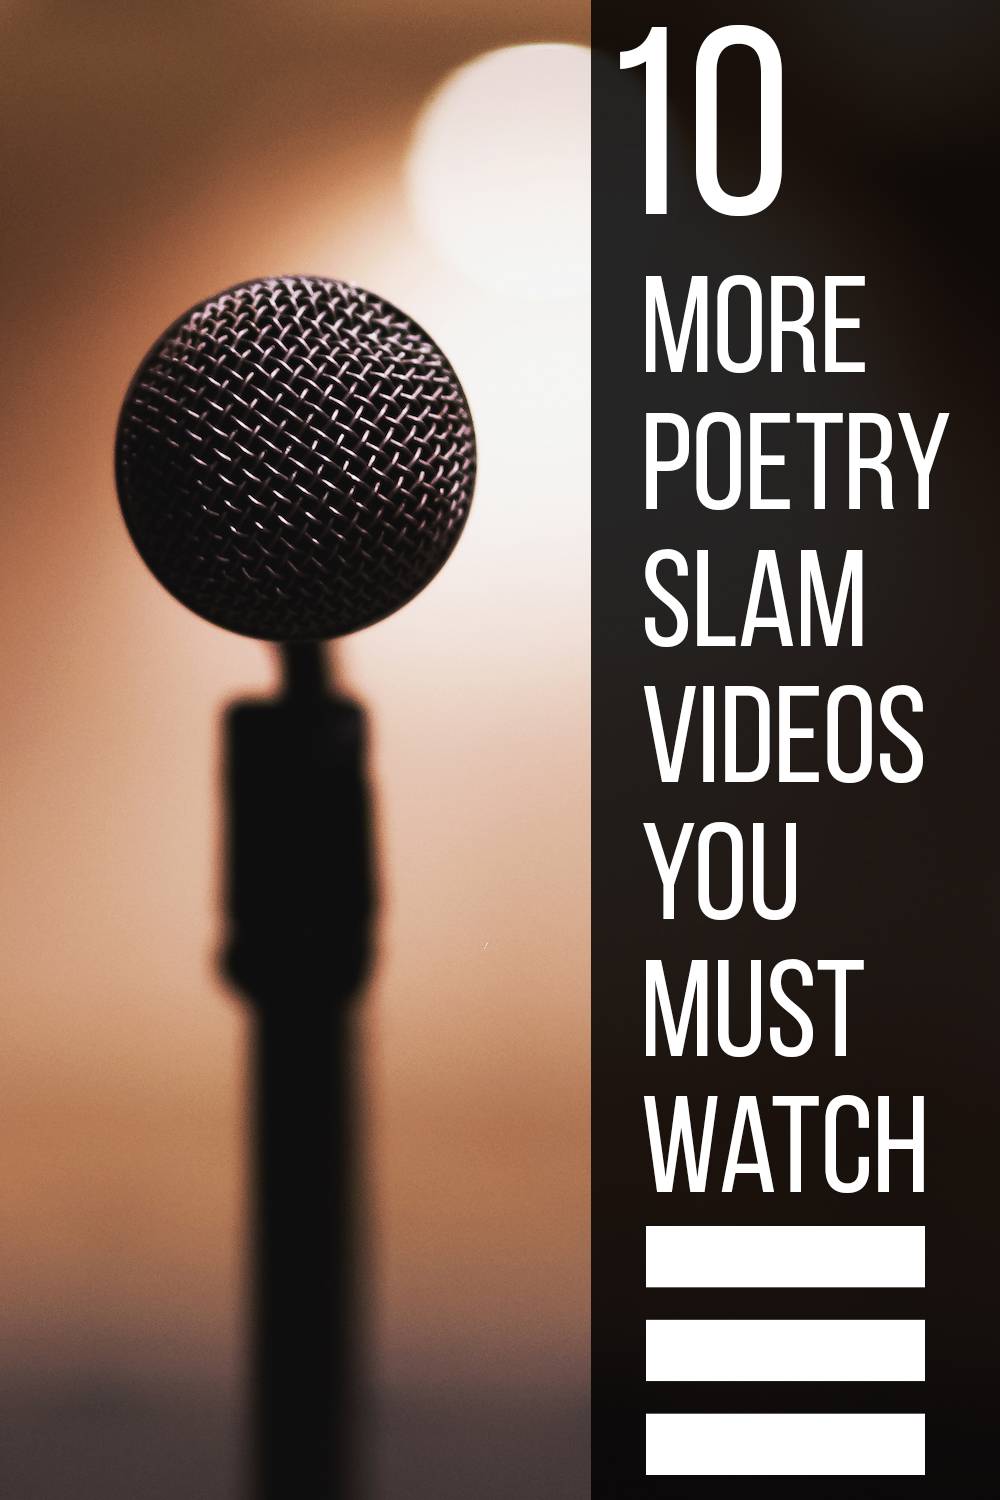 Need a poetry fix? Check out these 10 rad poetry slam videos!